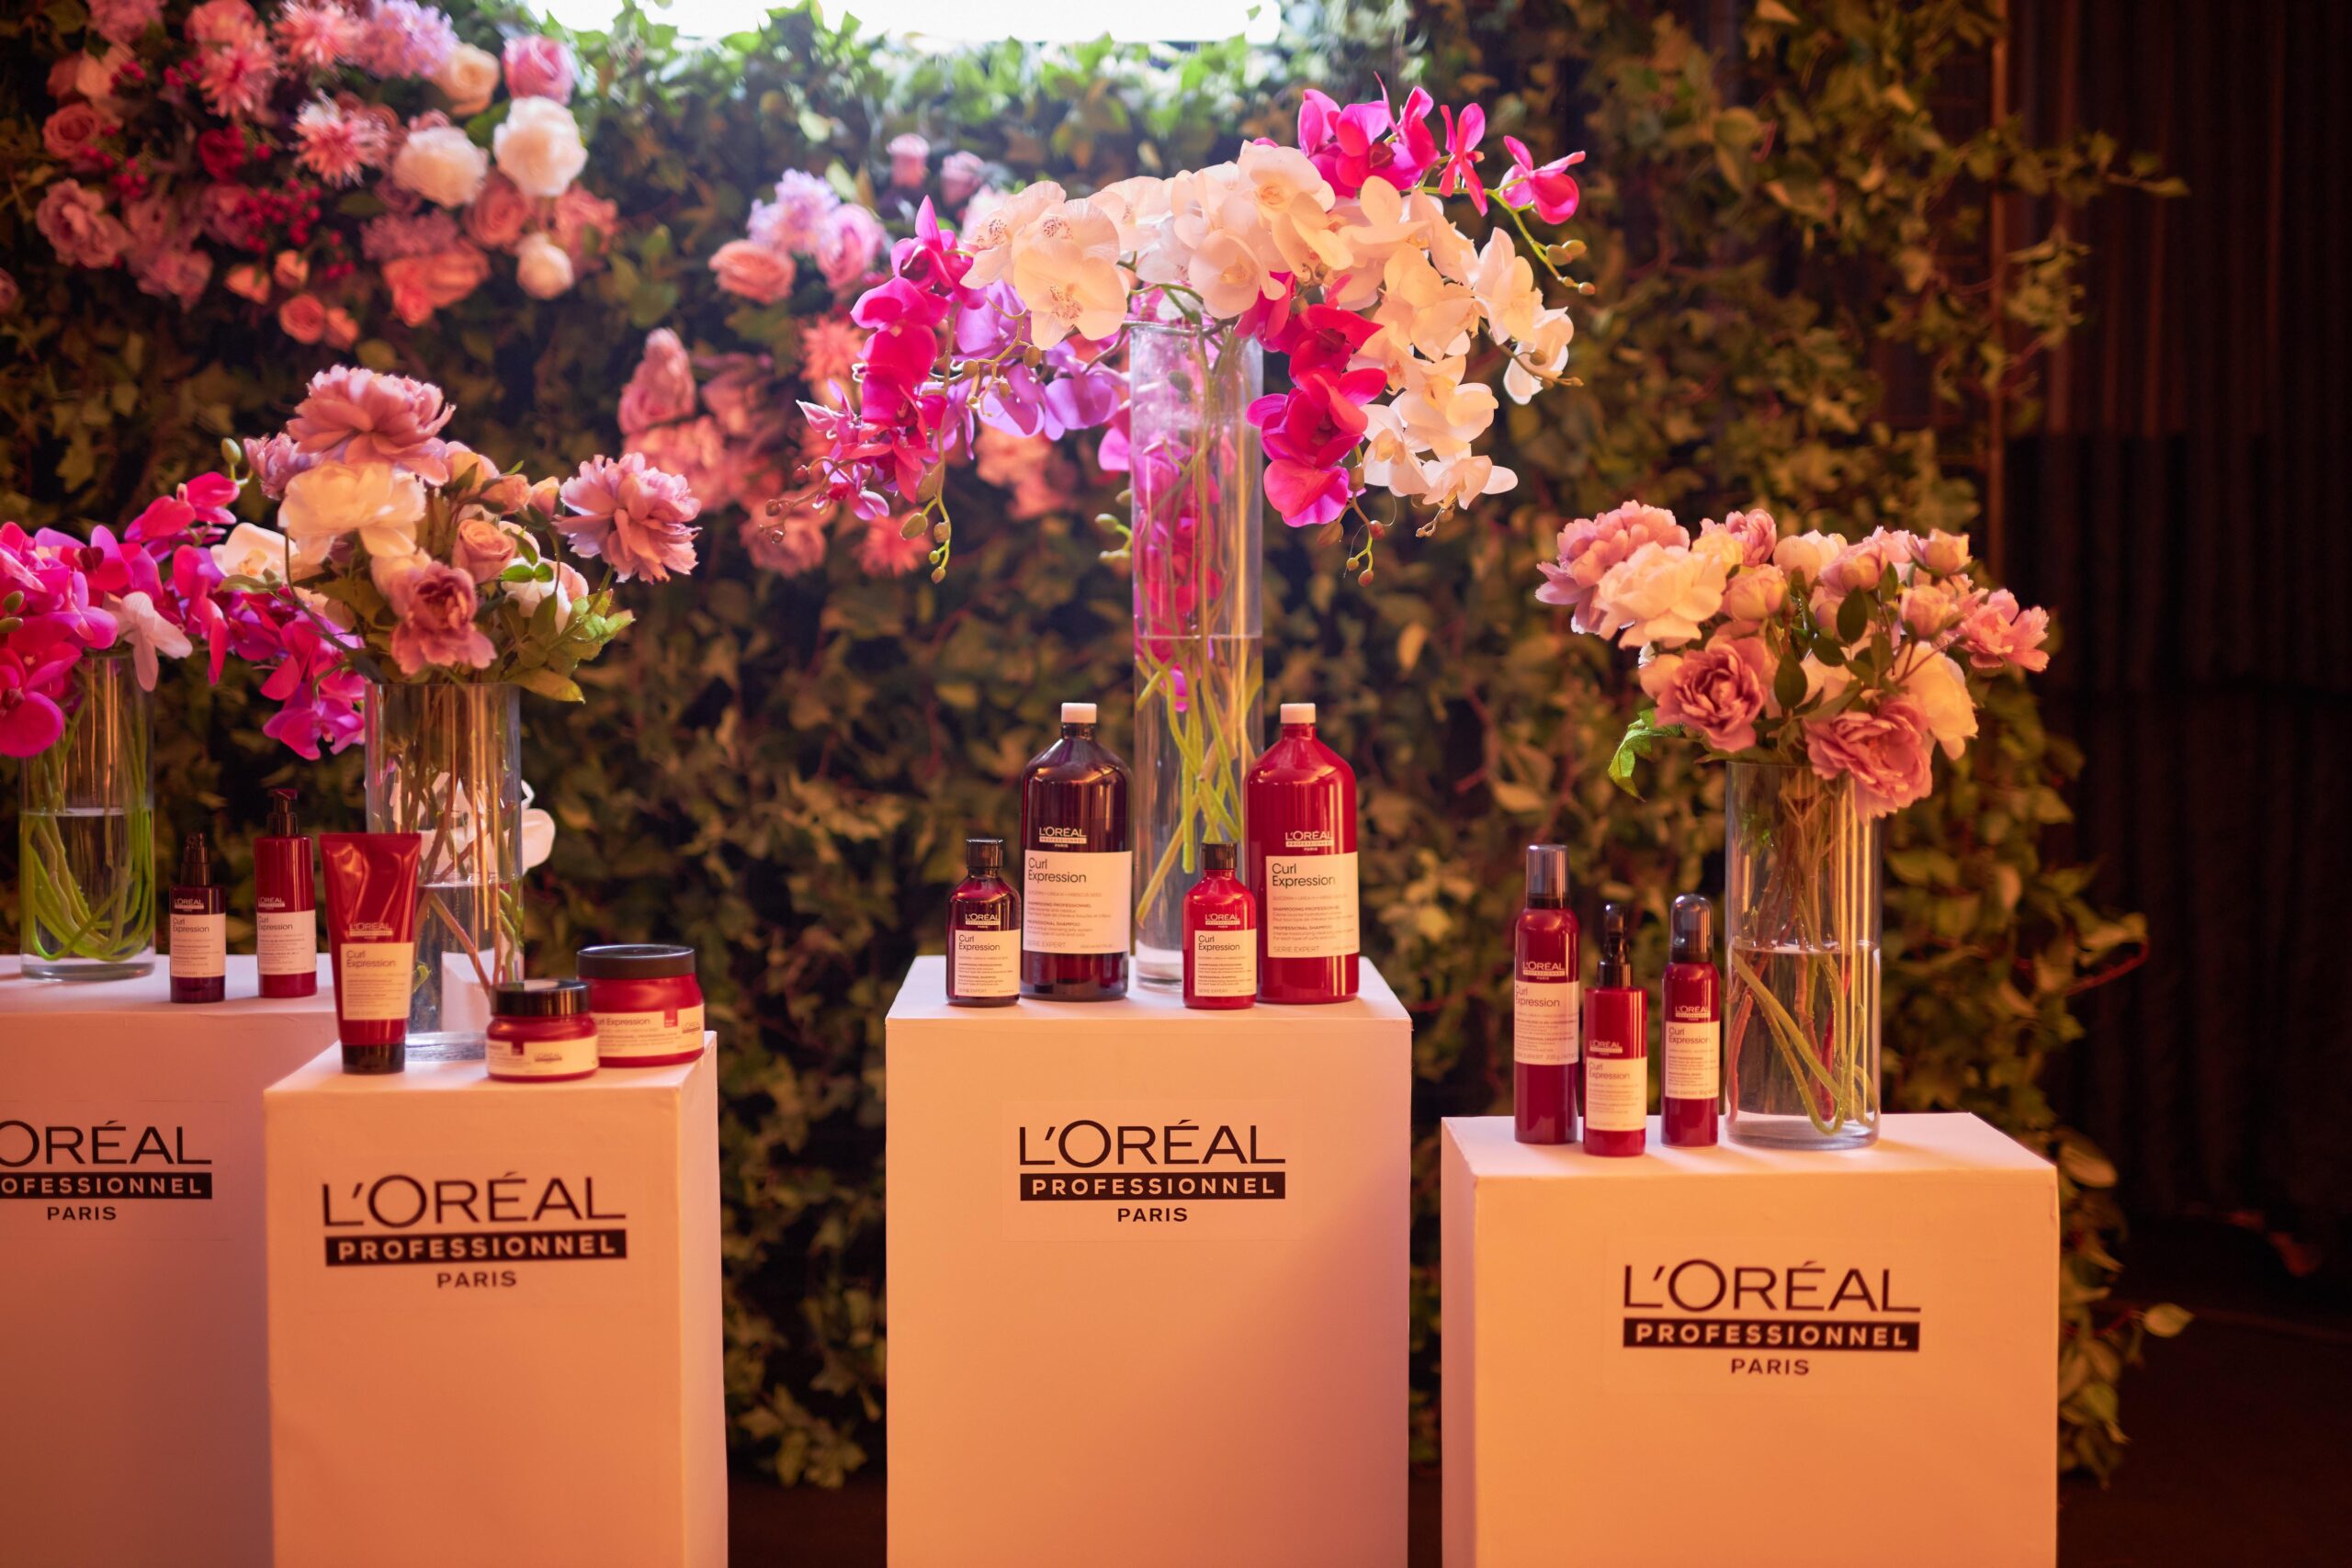 L'Oreal Professionnel Paris introduces a New Range of Hair Products for  Kinky and Natural Hair | BellaNaija